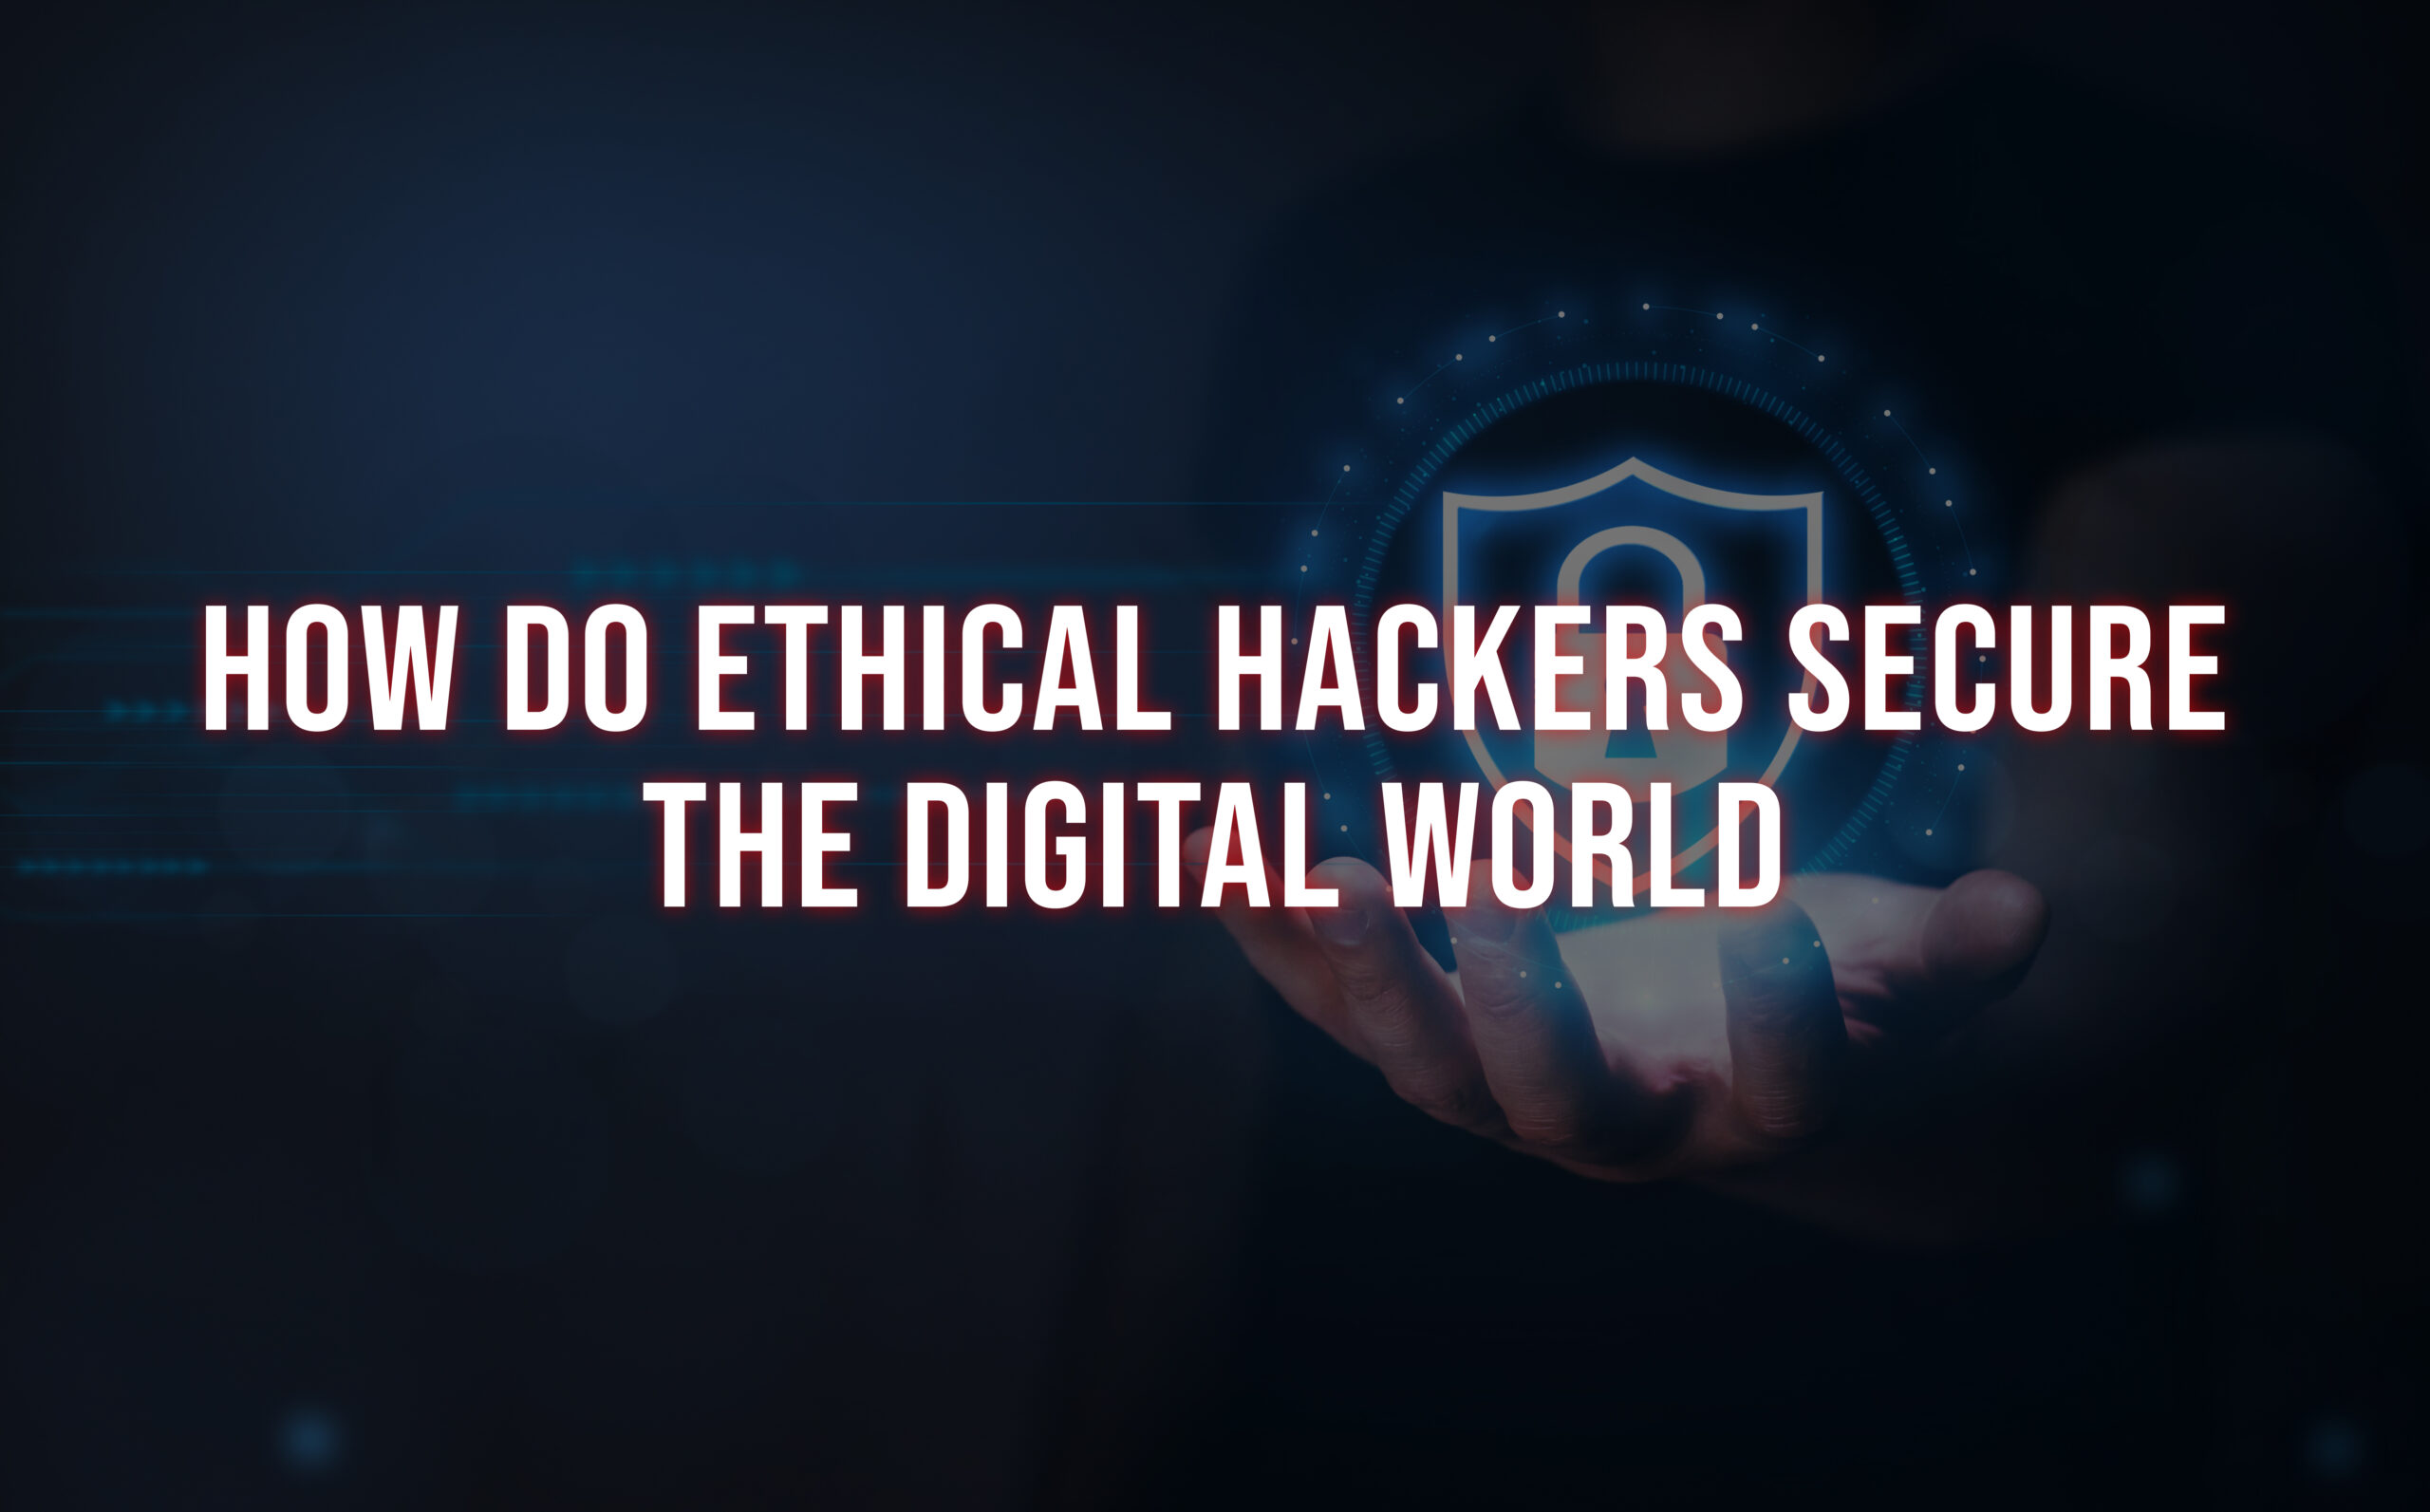 How Do Ethical Hackers Secure the Digital World?